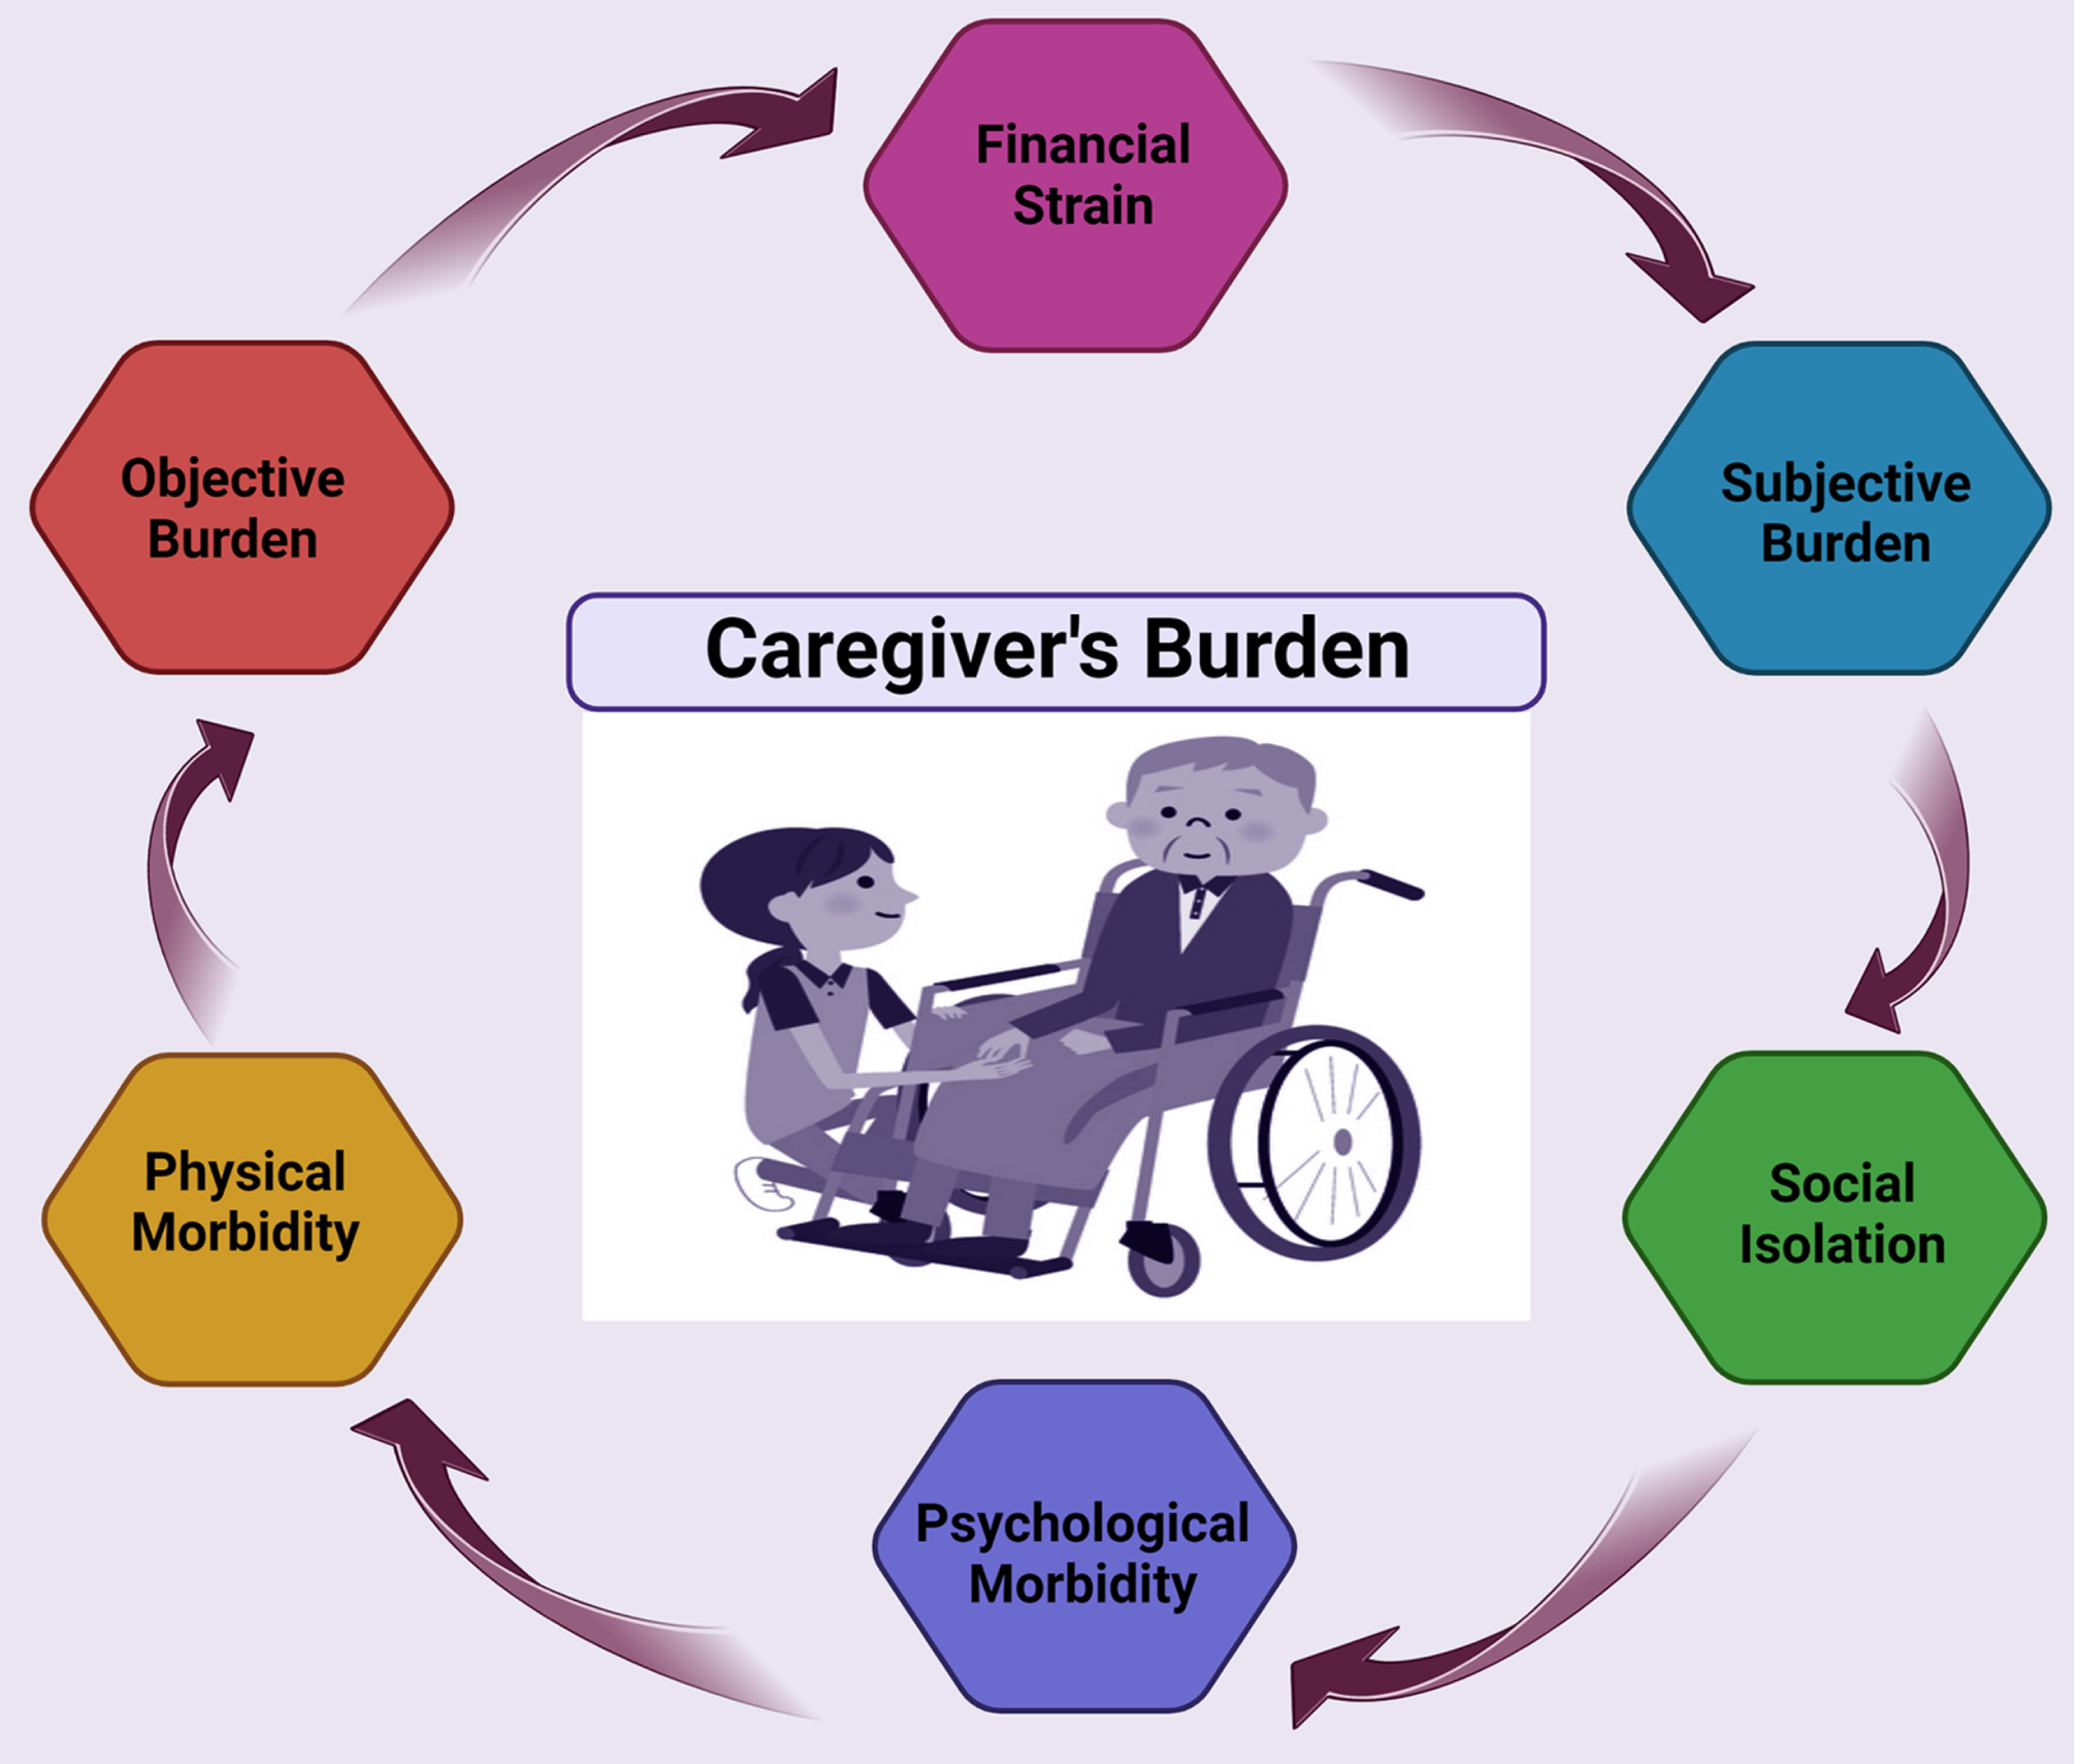 Informal caregiver’s burden. The cognitive decline with the progression of AD/ADRD results in greater levels of responsibility and depression among caregivers.